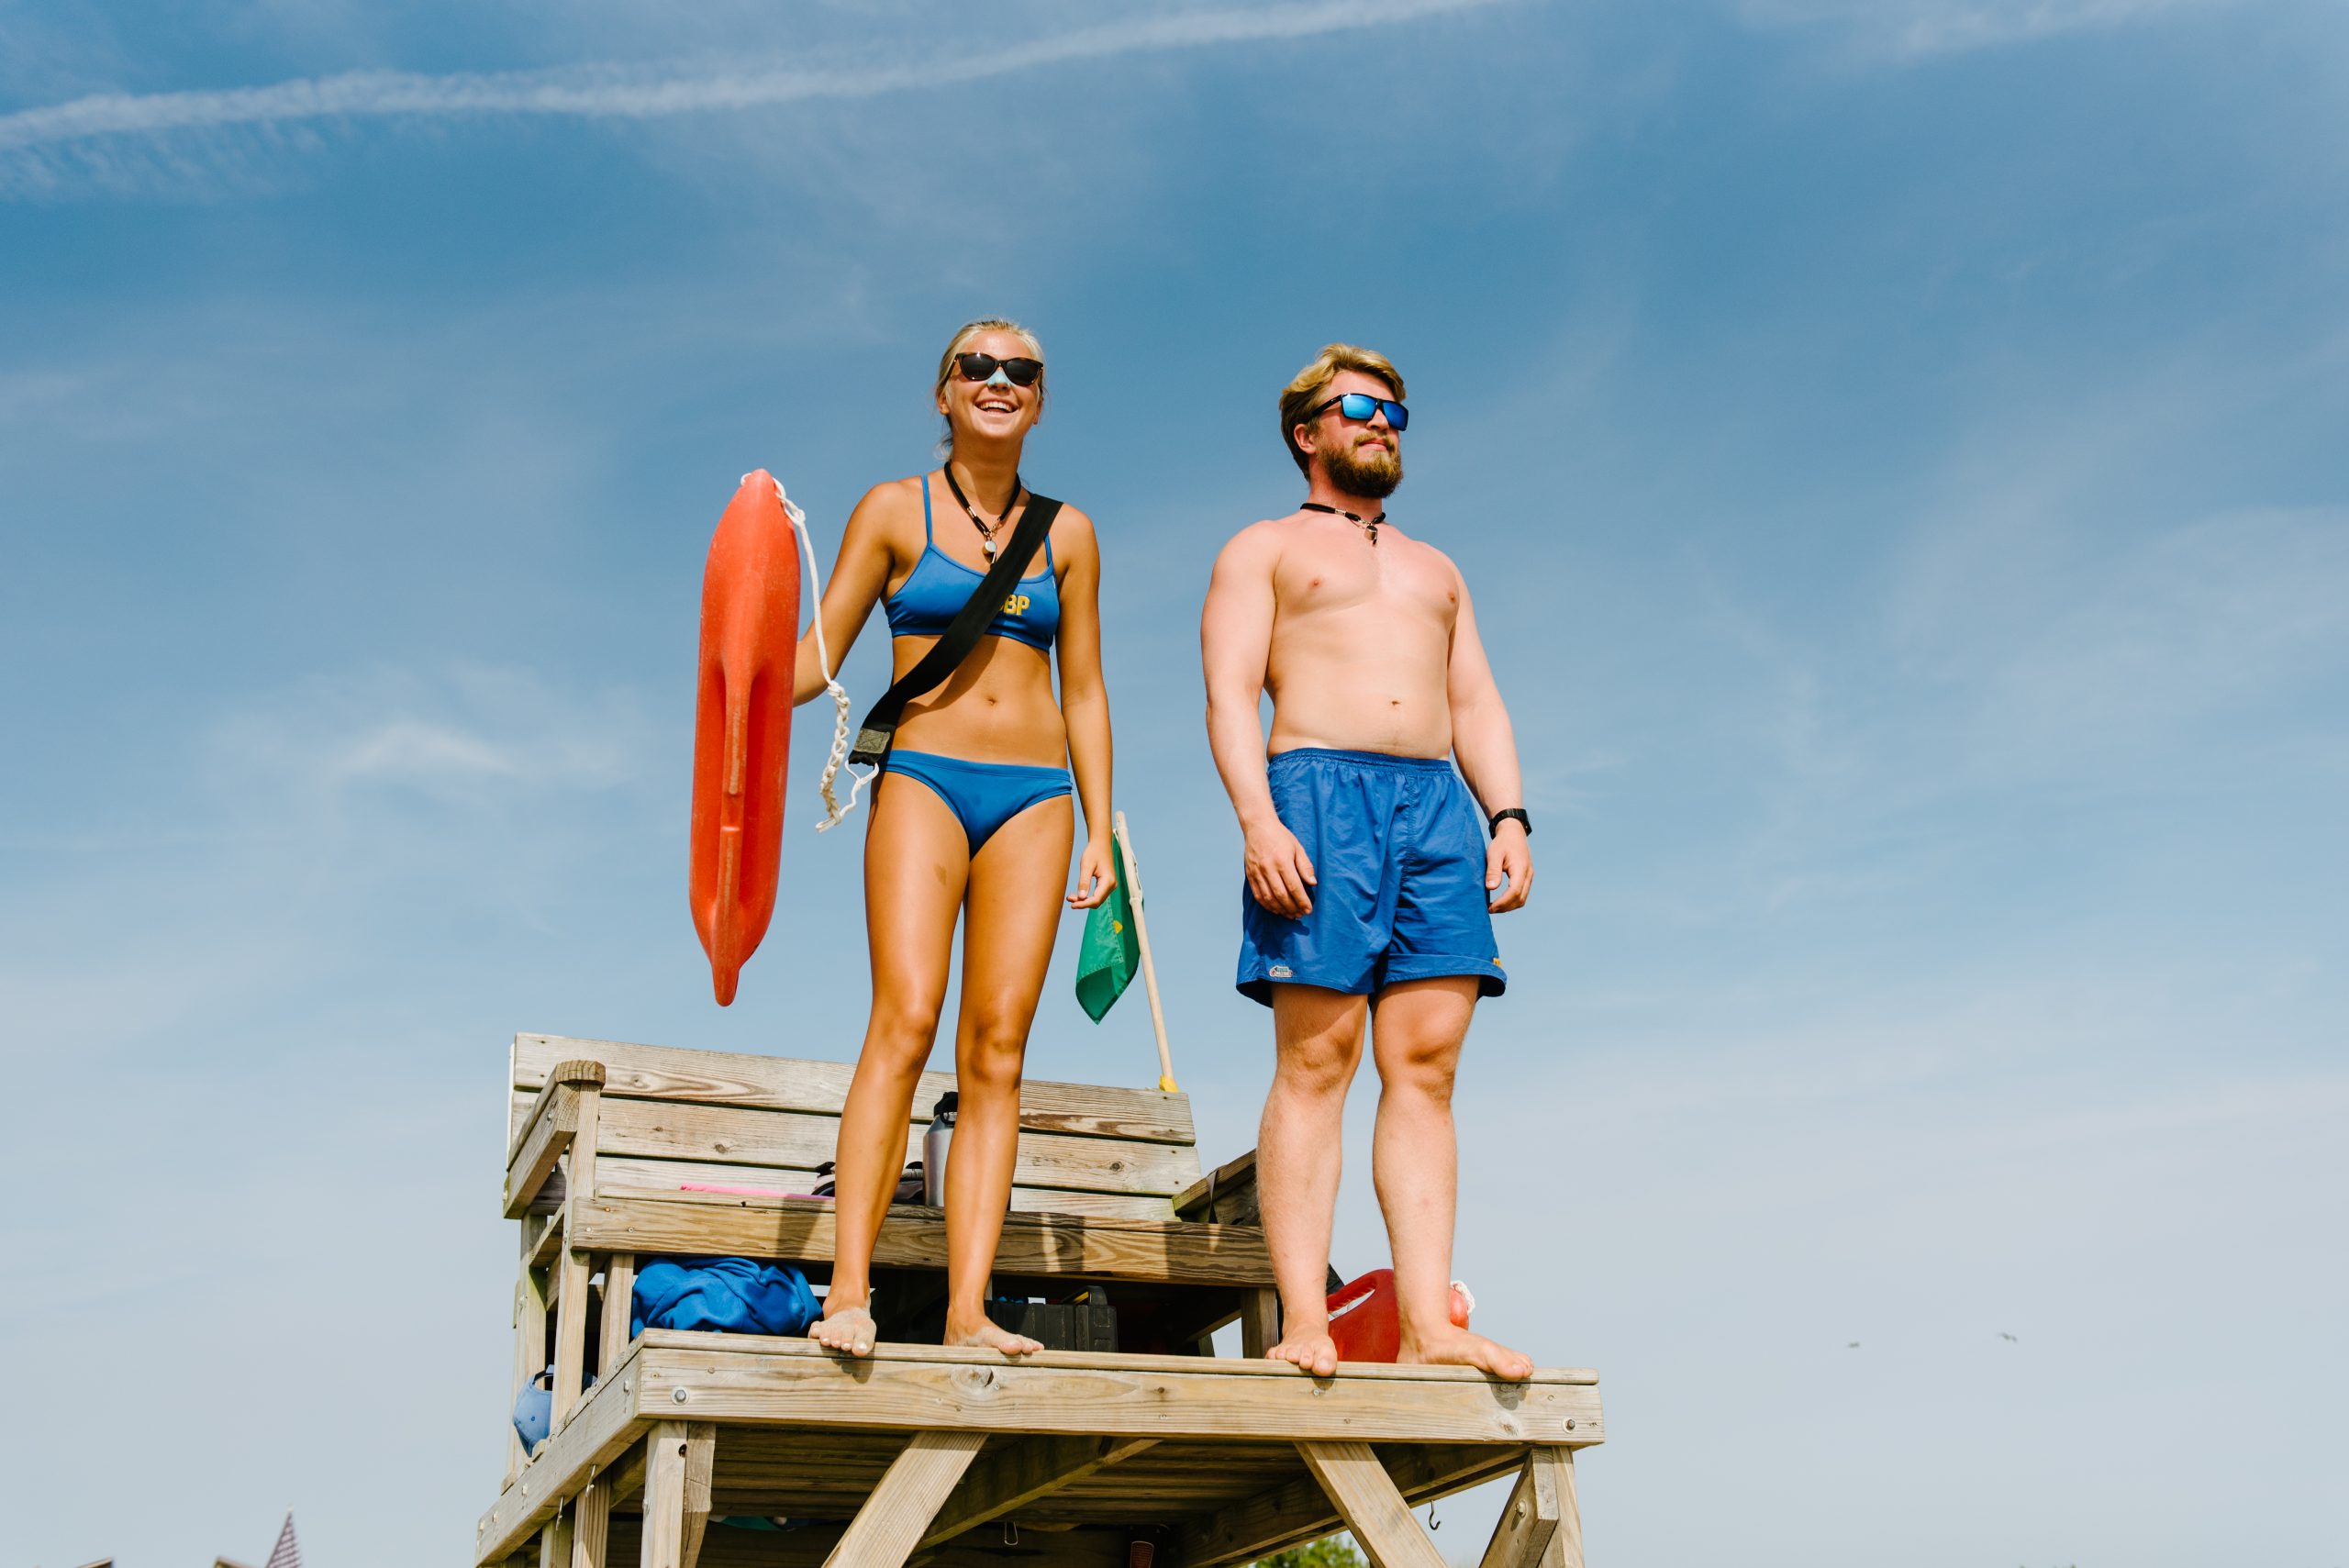 A team of lifeguards, one woman and one man, dressed in blue bathing suits stand on a lifeguard stand against a blue, slightly cloudy sky. The woman lifeguard is also holding a lifesaving floatation device.